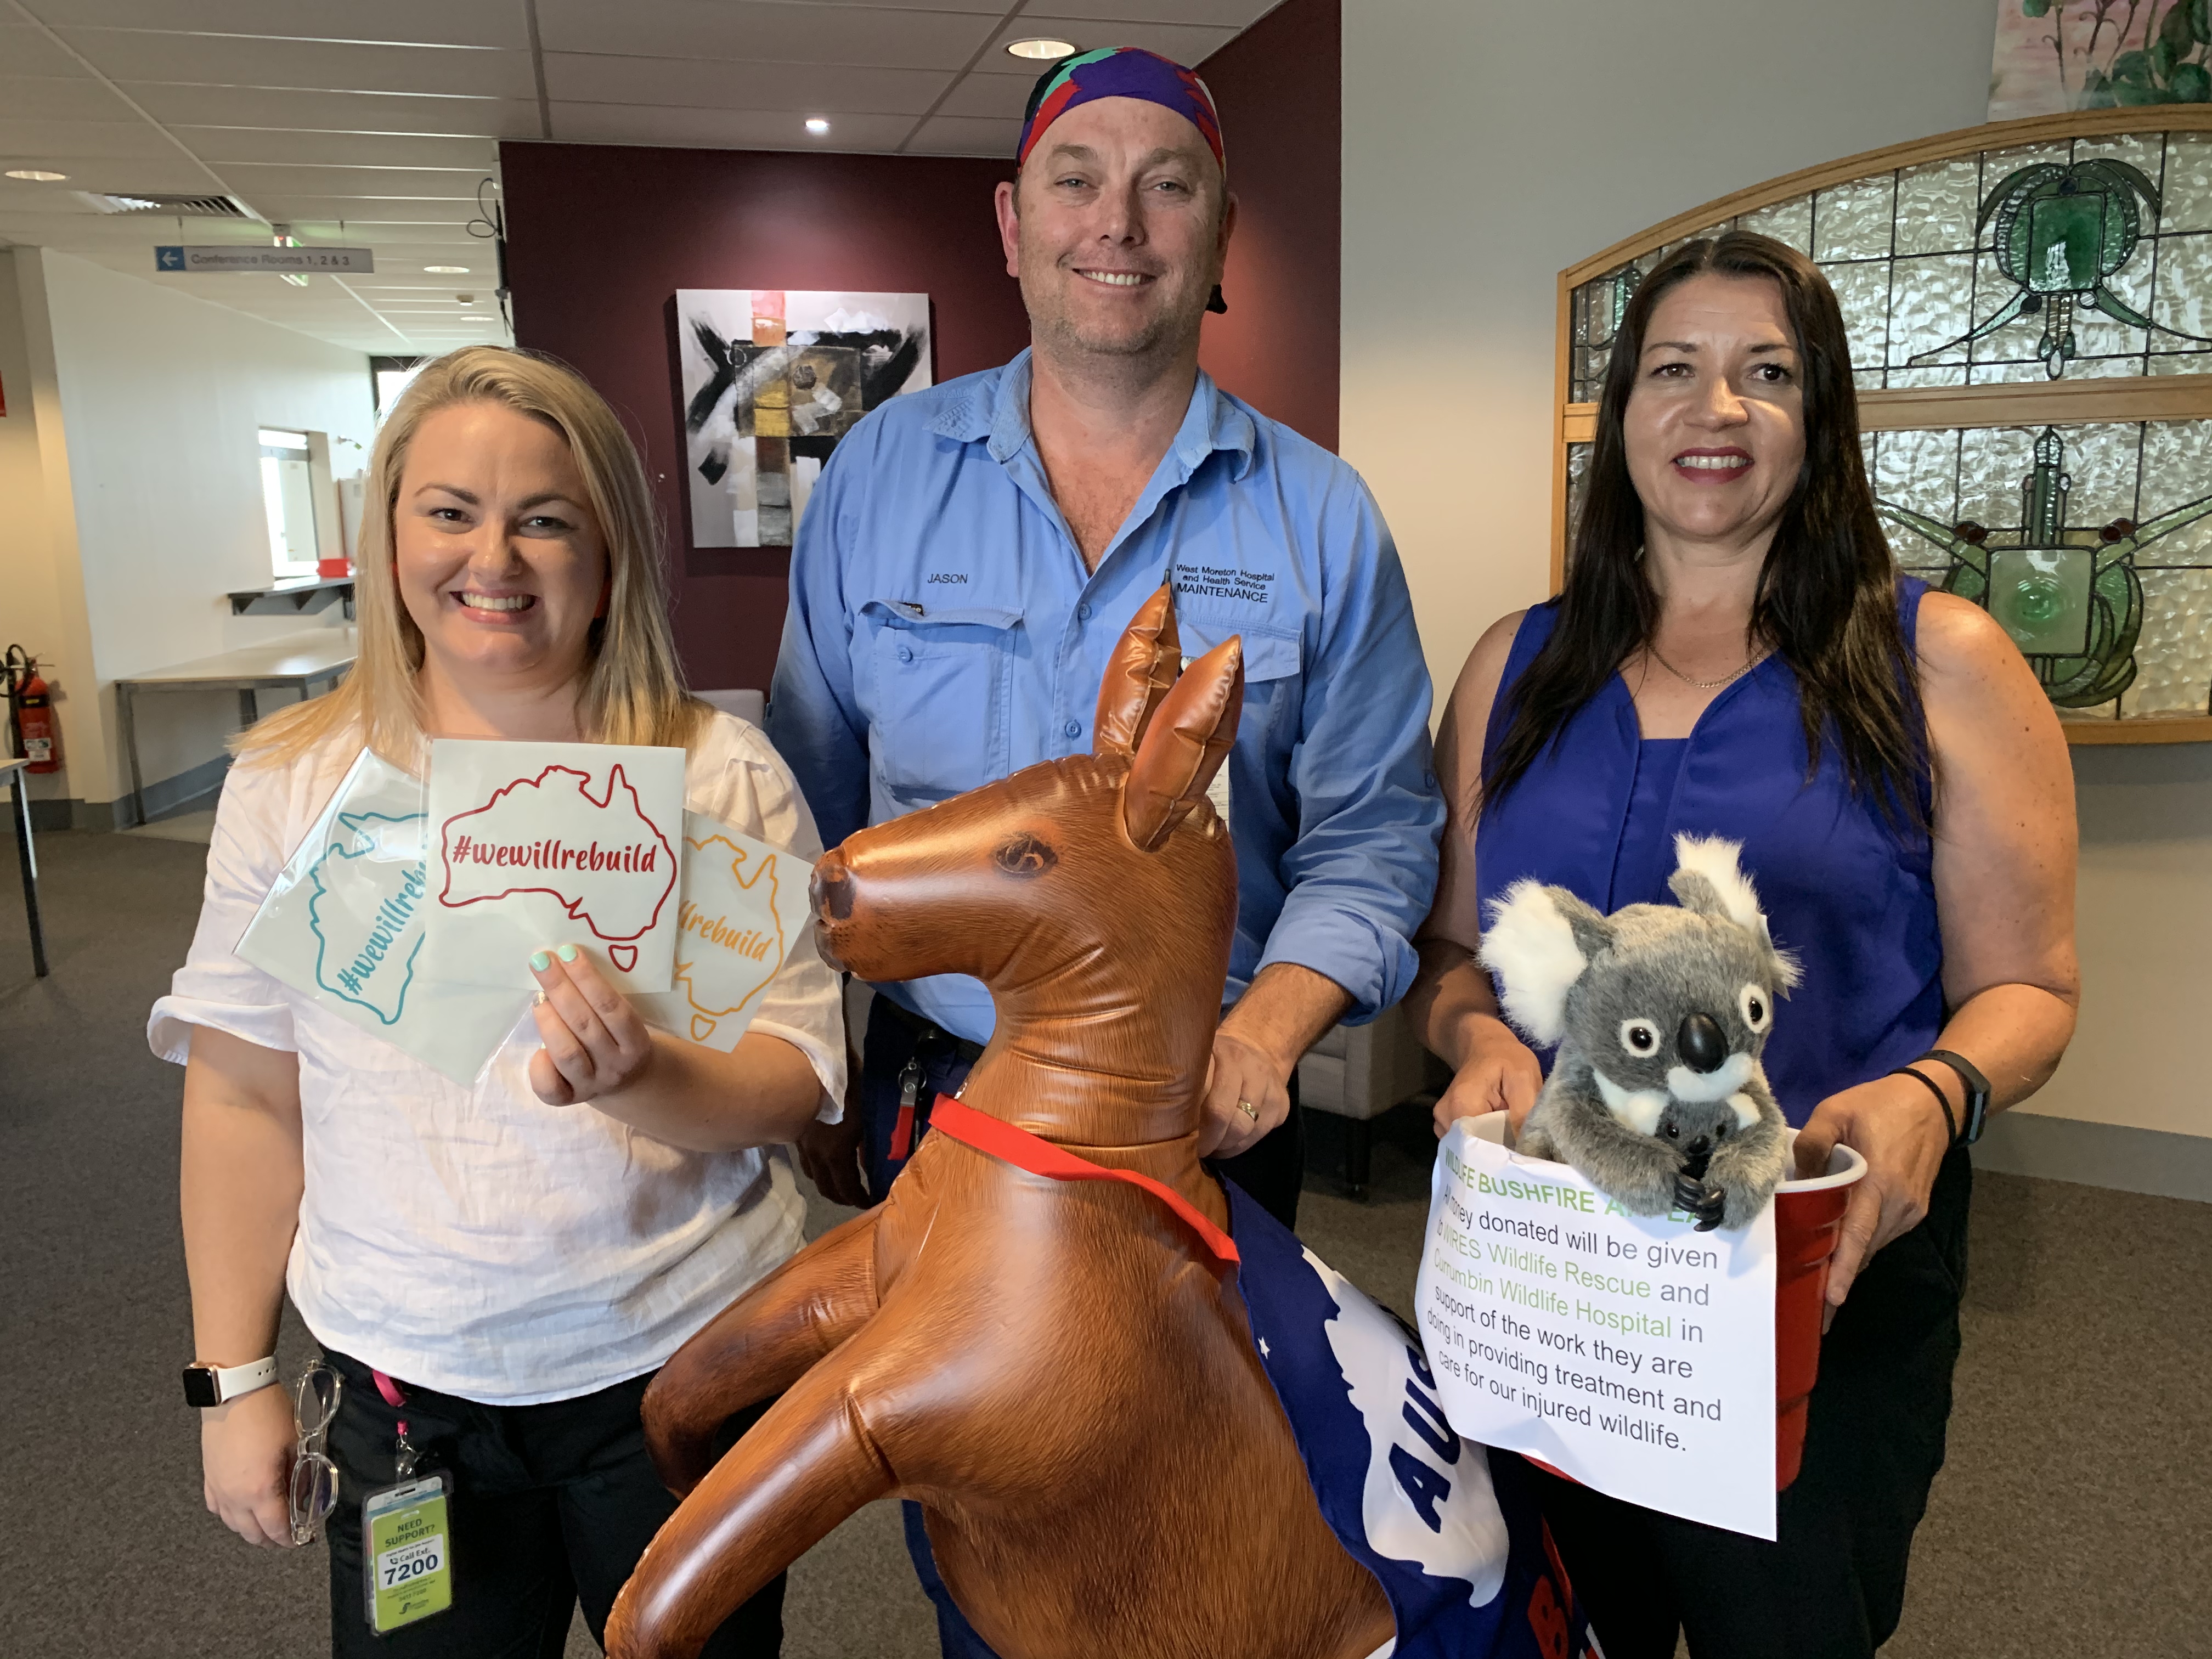 West Moreton Health staff members Vicky Bates, Jason Deacon and Fiona Calabria were among many staff who took part in fundraising to support bushfire appeals.